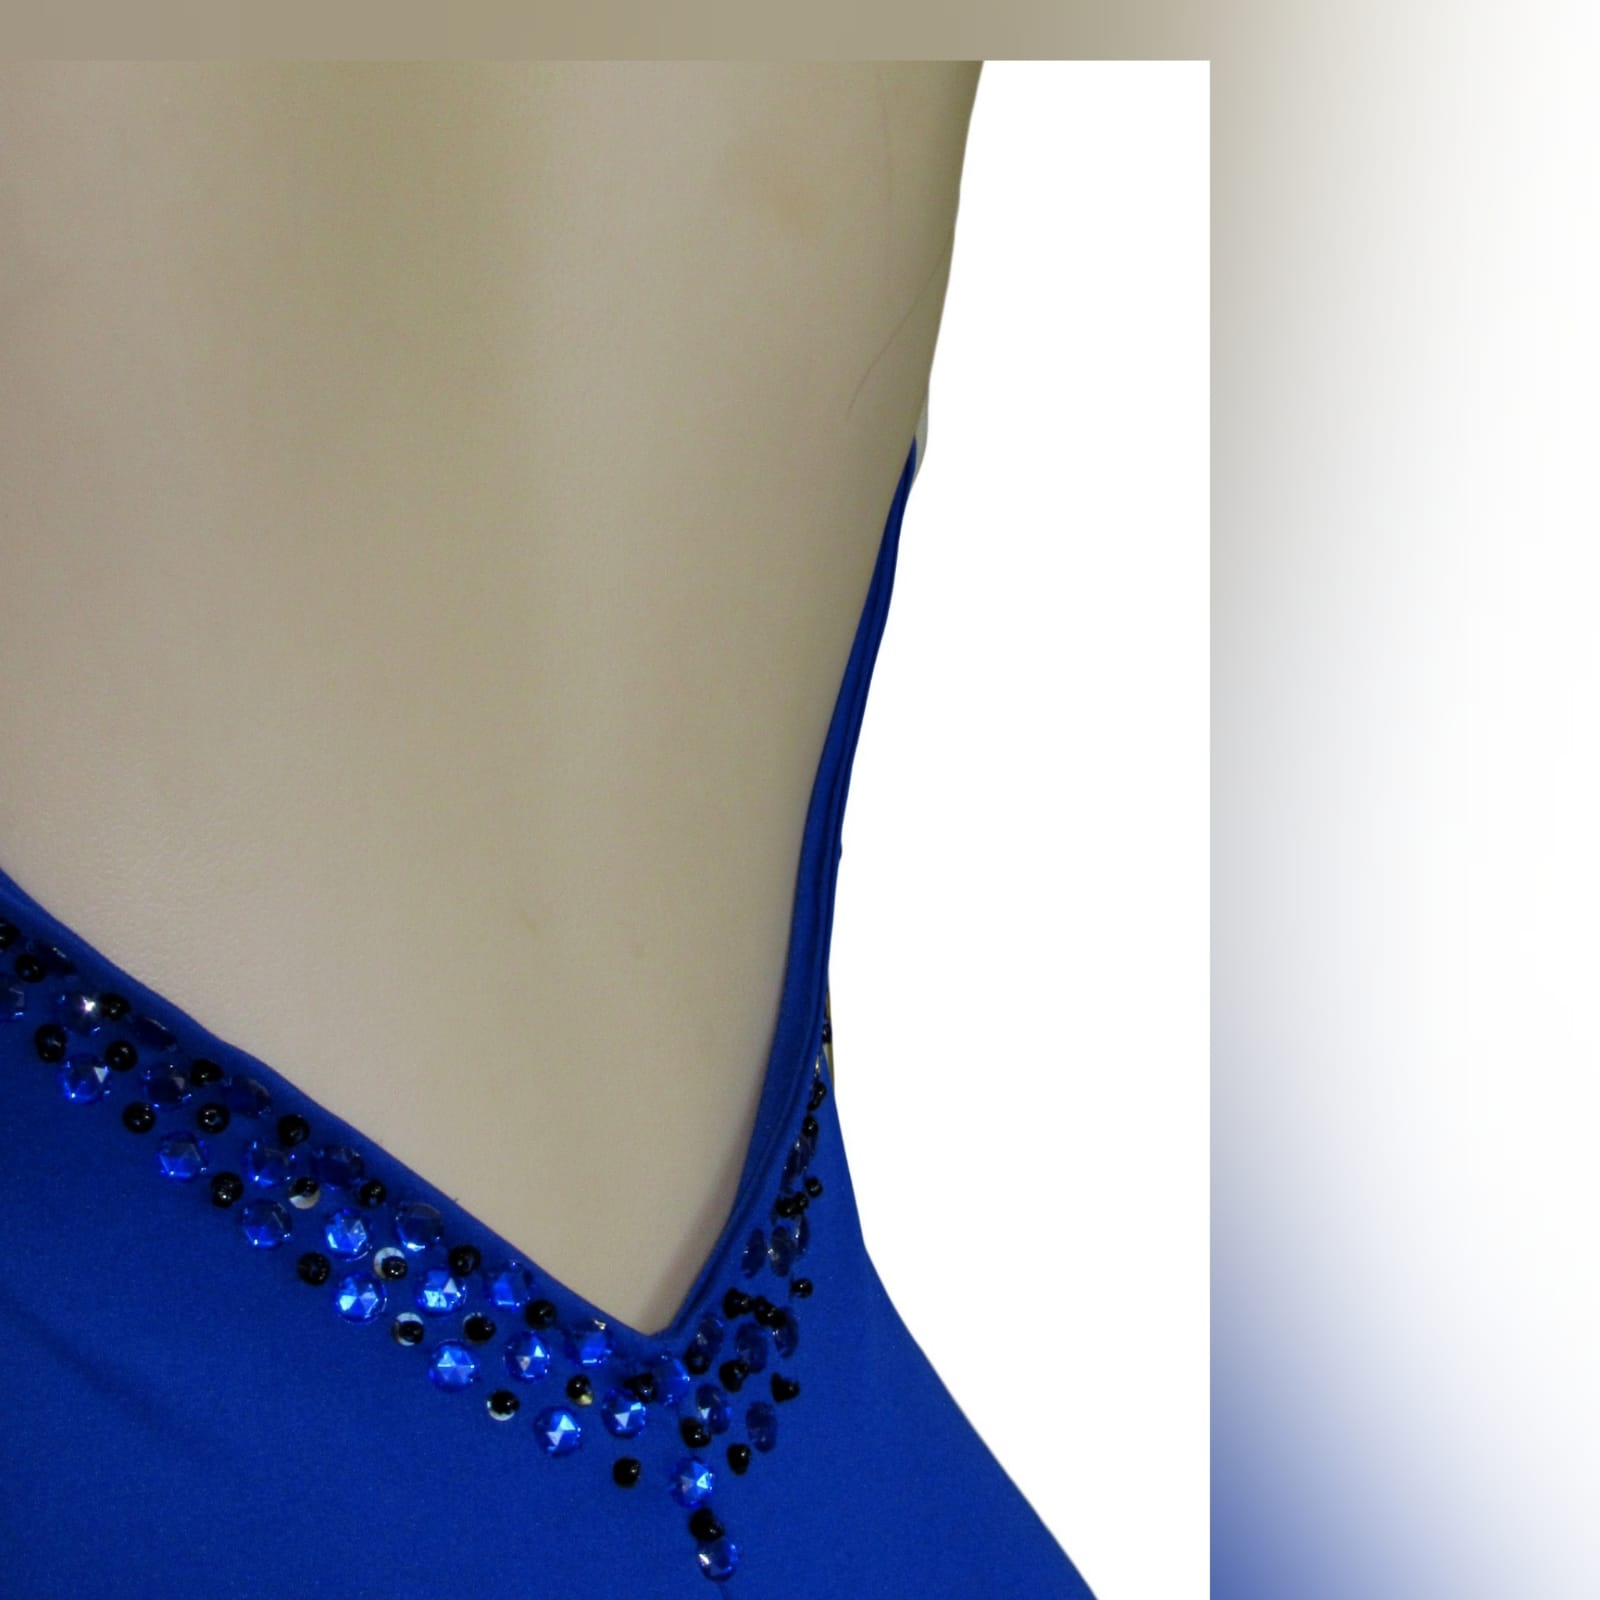 Royal blue soft mermaid beaded prom dress 3 royal blue soft mermaid beaded prom dress, with a v neckline, low v open back detailed with blue and black beads, thin shoulder straps and a long train.